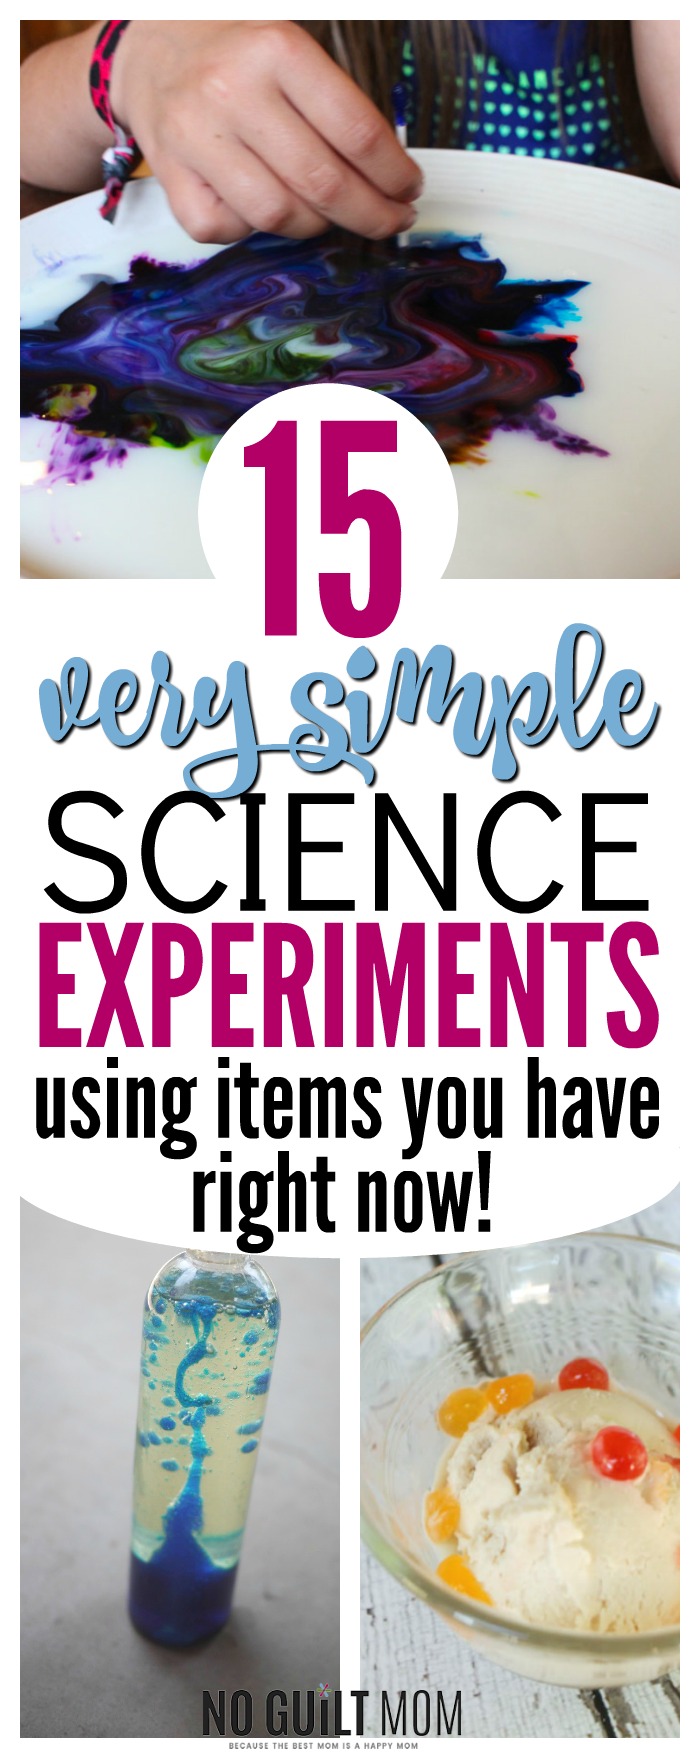 15 Very Simple Science Experiments Using What You Already Have At Home No Guilt Mom